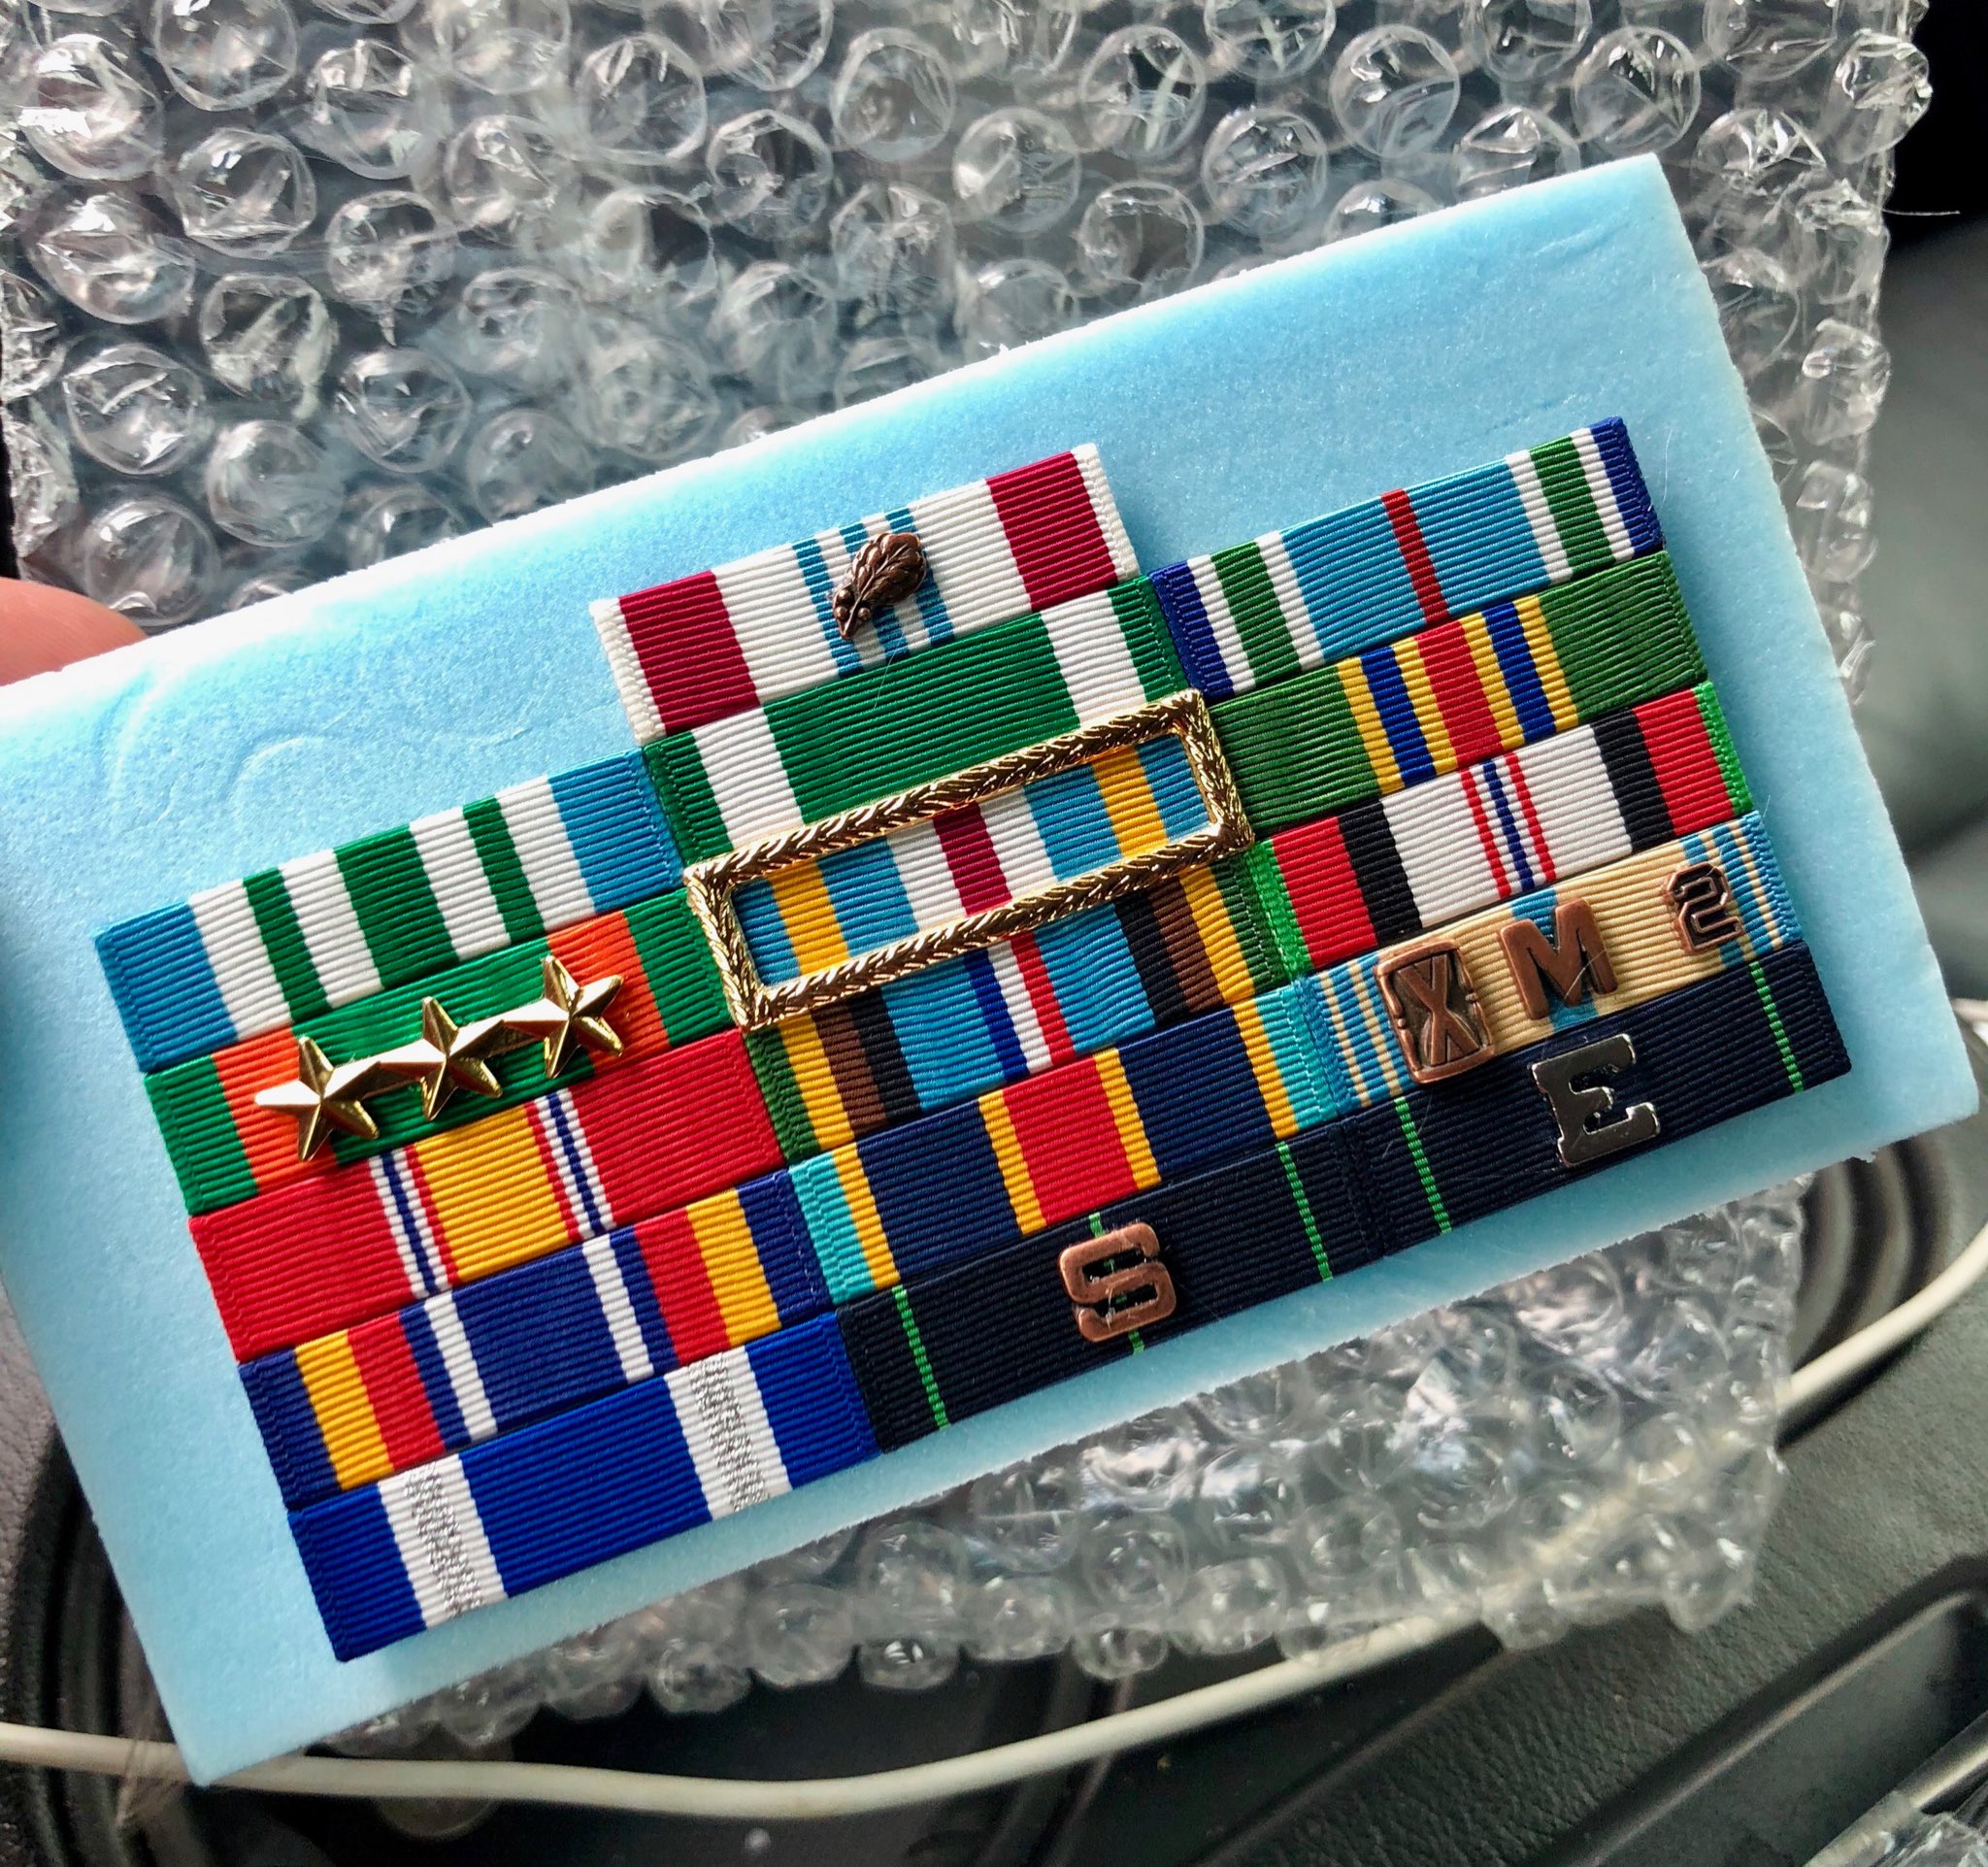 Jeff Gorell on X: Got my updated #Navy ribbon rack today, just in time for  #RimPac2018. My ribbons and medals were stolen out of my truck last month.   / X